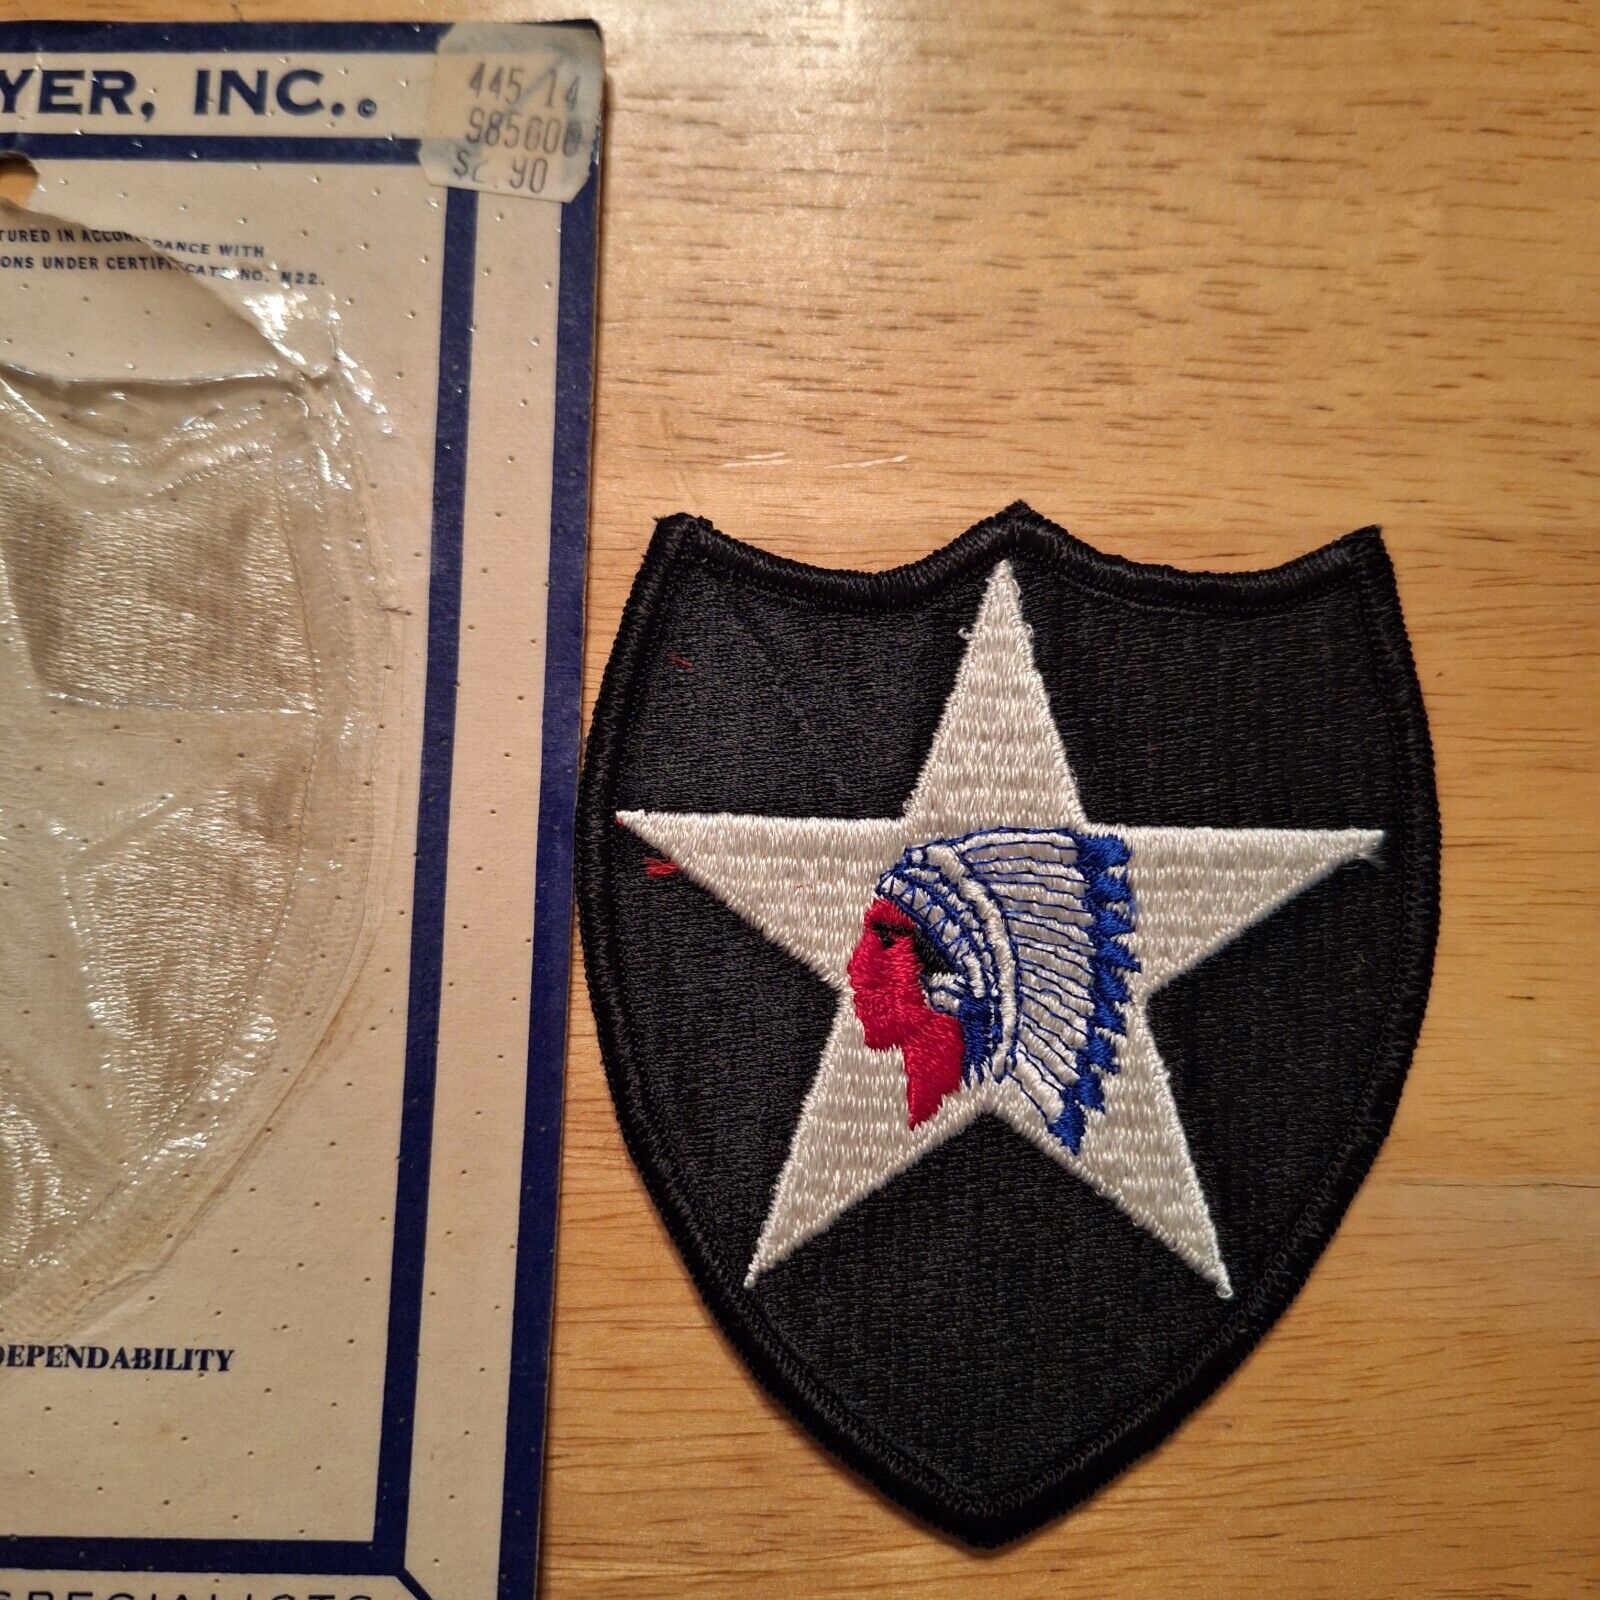 N.S. Meyer 2nd infantry division patch, Indian chief with star